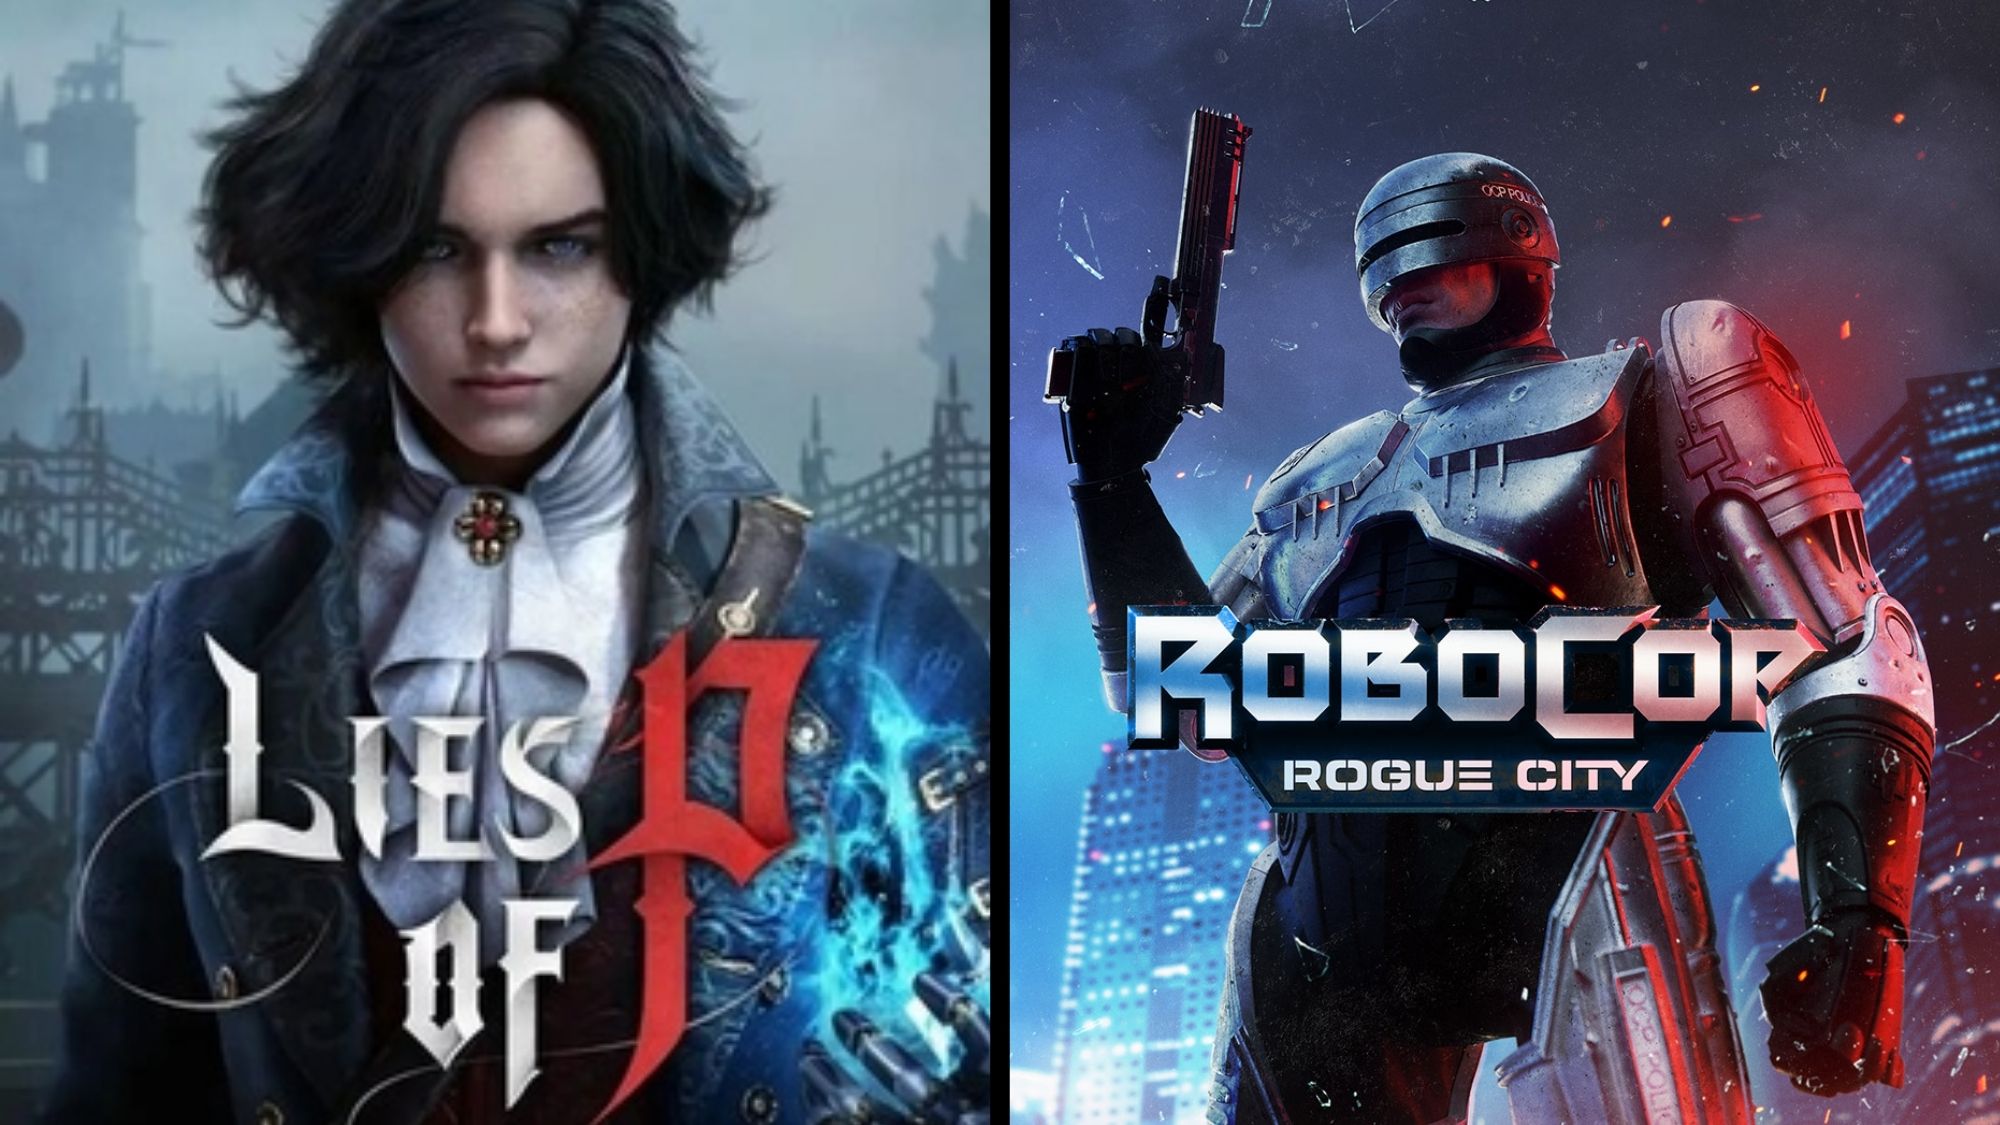 The Lies Of P And Robocop: Rogue City Demos Helped Improve The Main Games